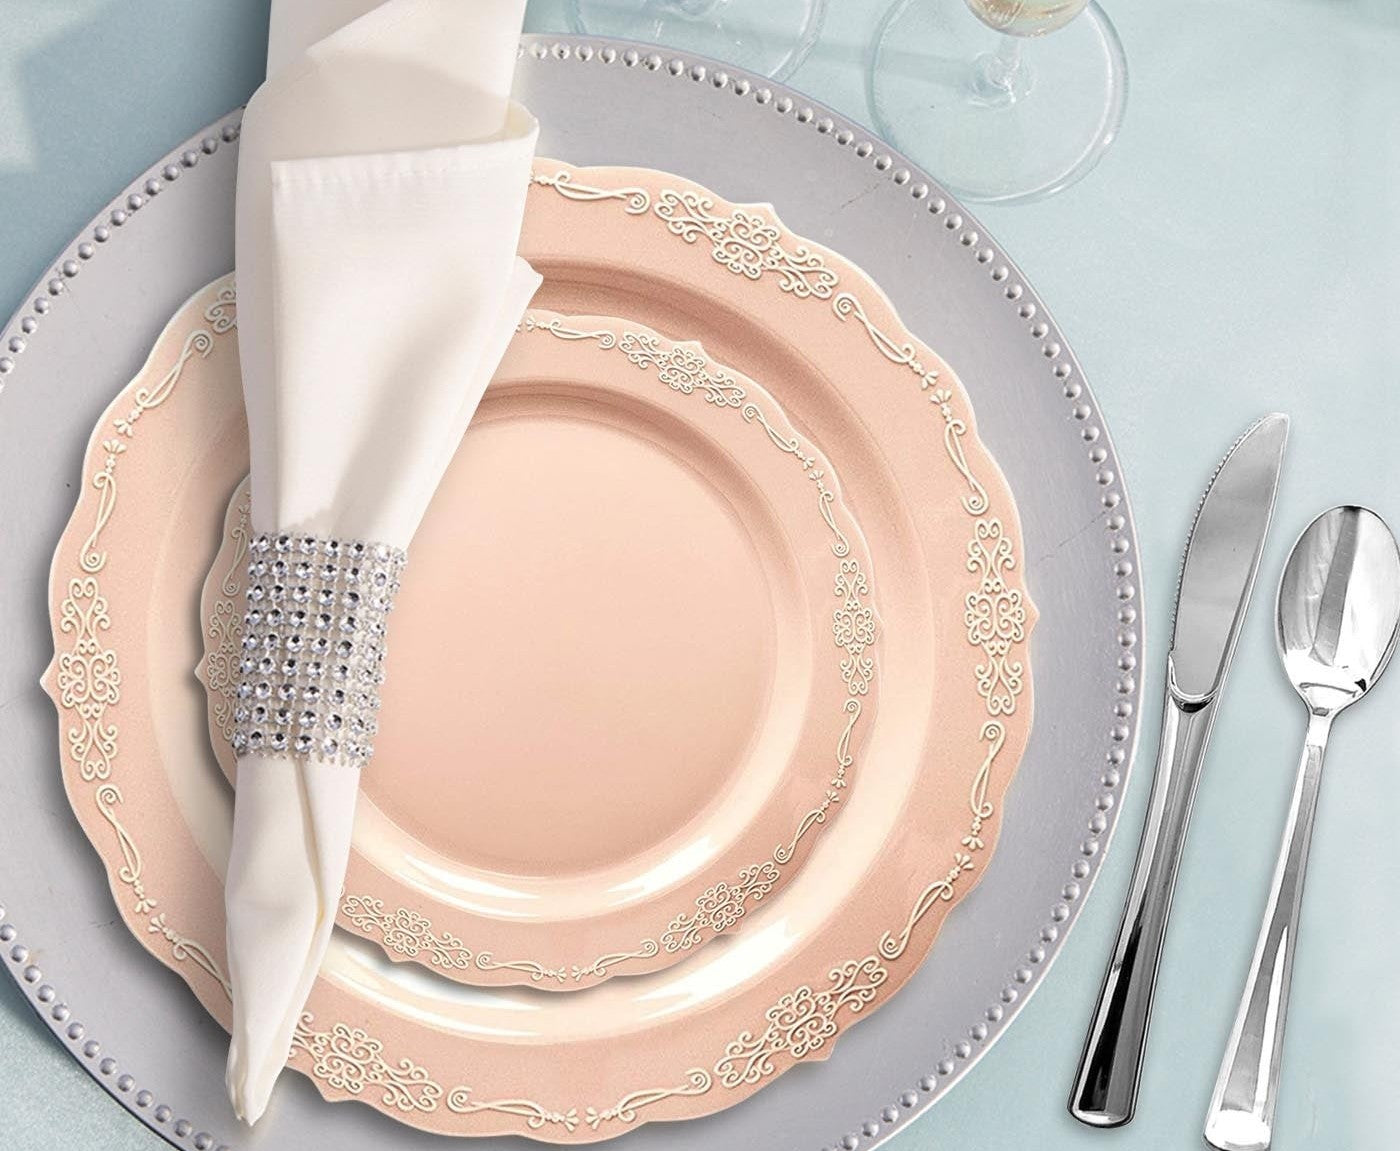 The Best Guide to Creating a Tablescape for Every Gathering